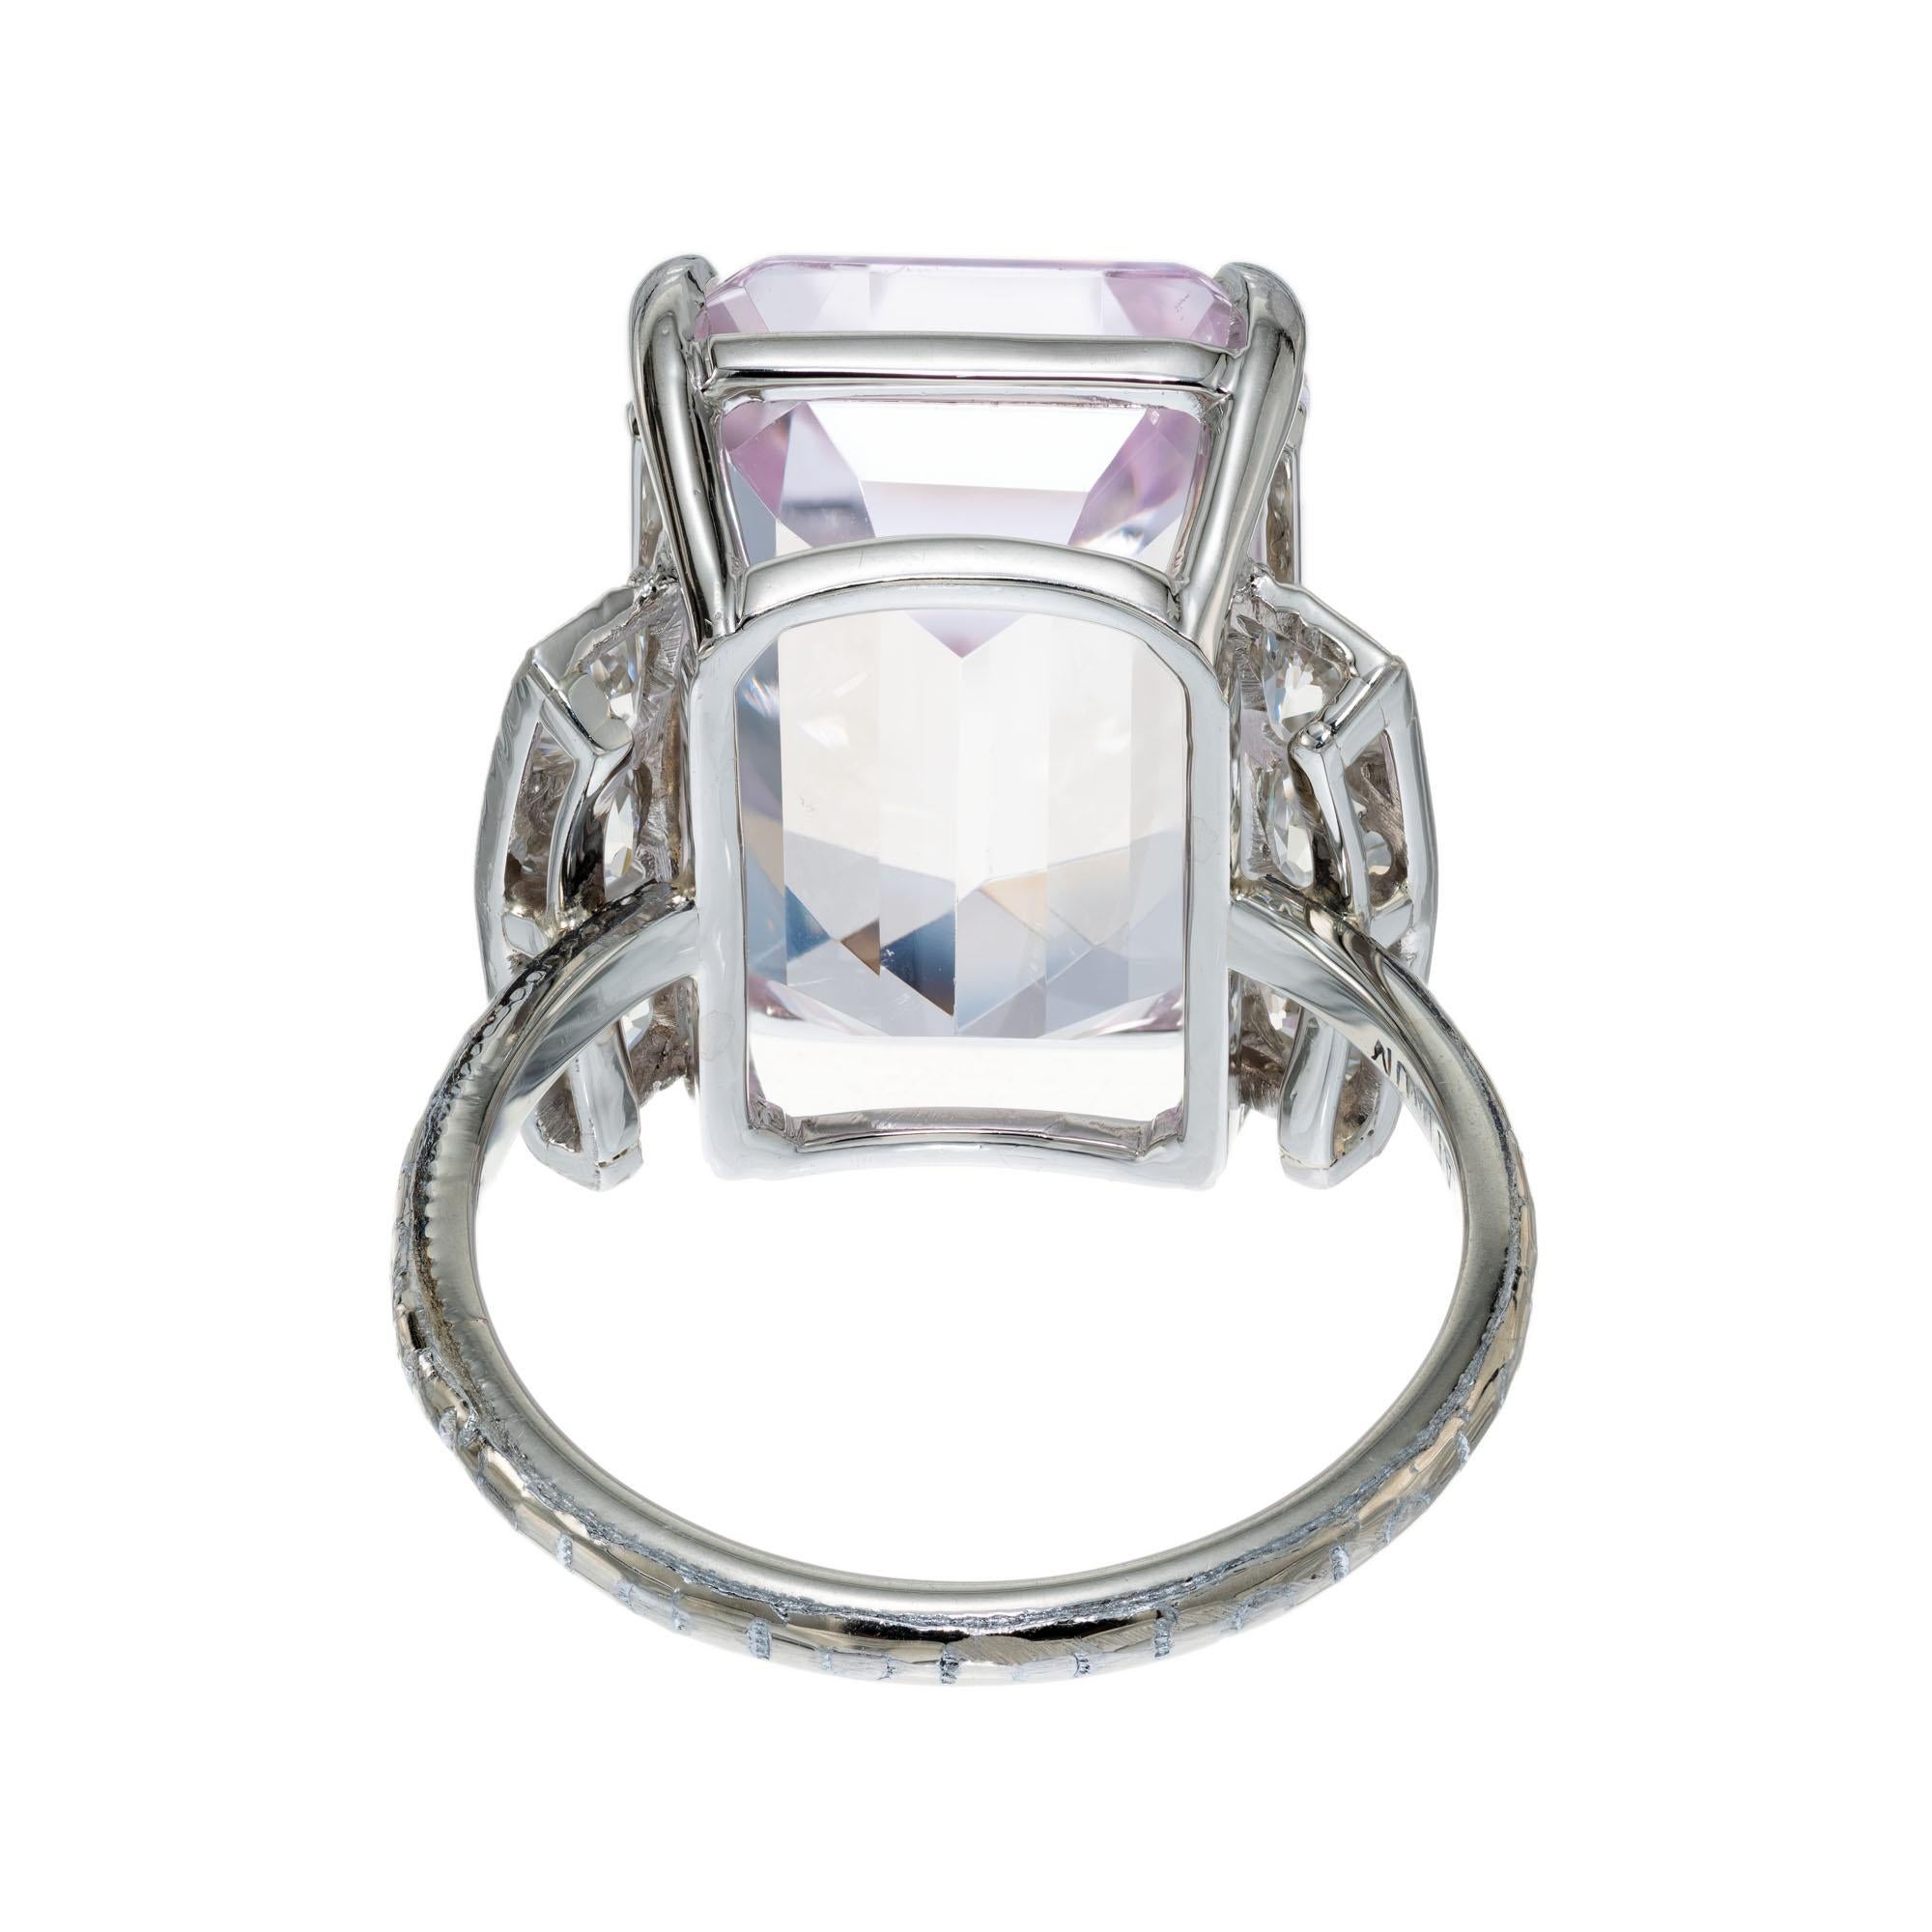 17.01 Carat Kunzite Diamond Platinum Gold Art Deco Cocktail Ring In Good Condition For Sale In Stamford, CT